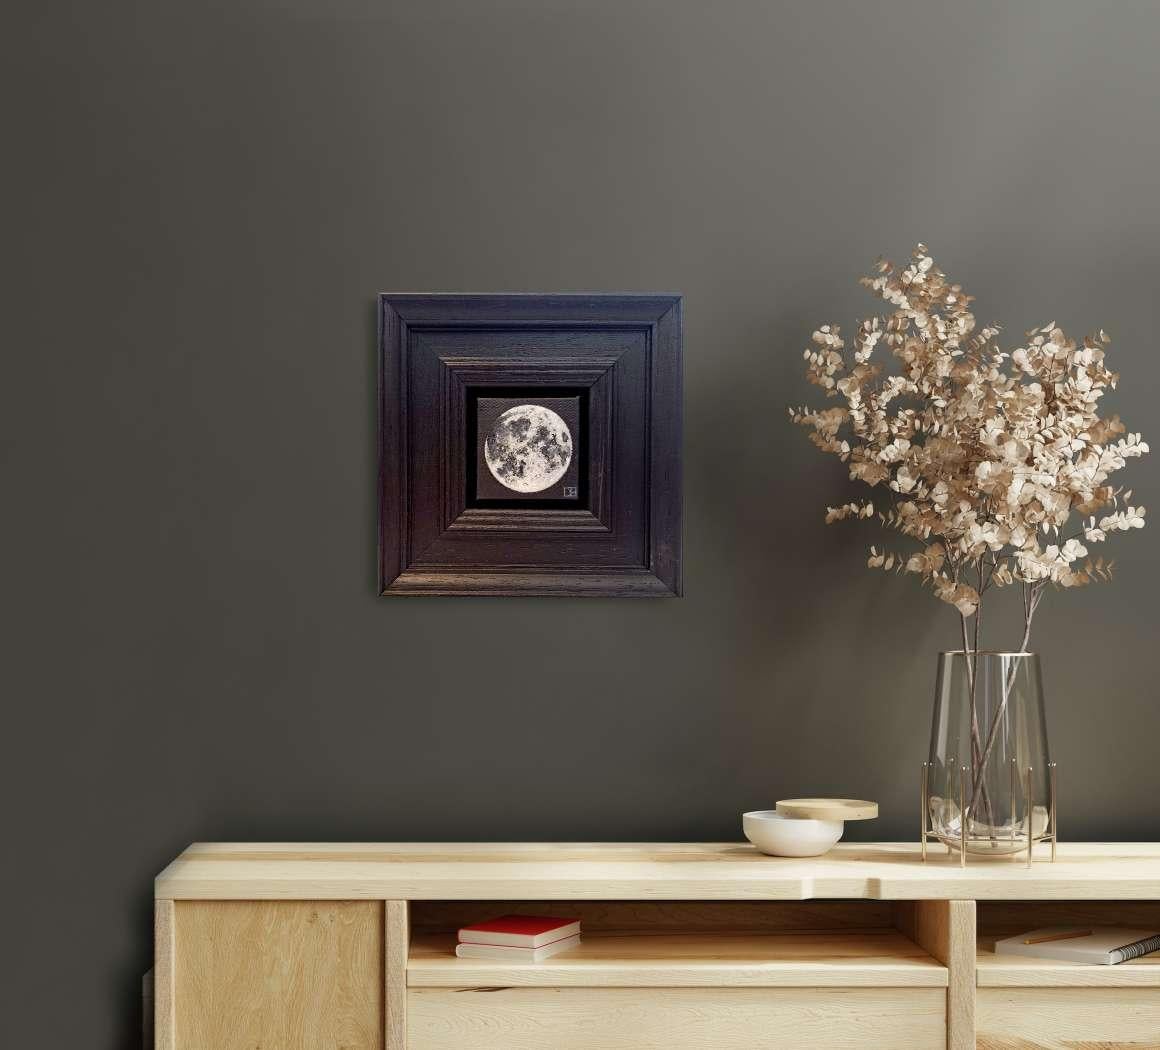 Pocket Full Moon is an original oil painting by Dani Humberstone as part of her Pocket Painting series featuring small scale realistic oil paintings, with a nod to baroque still life painting. The paintings are set in a black wood layered